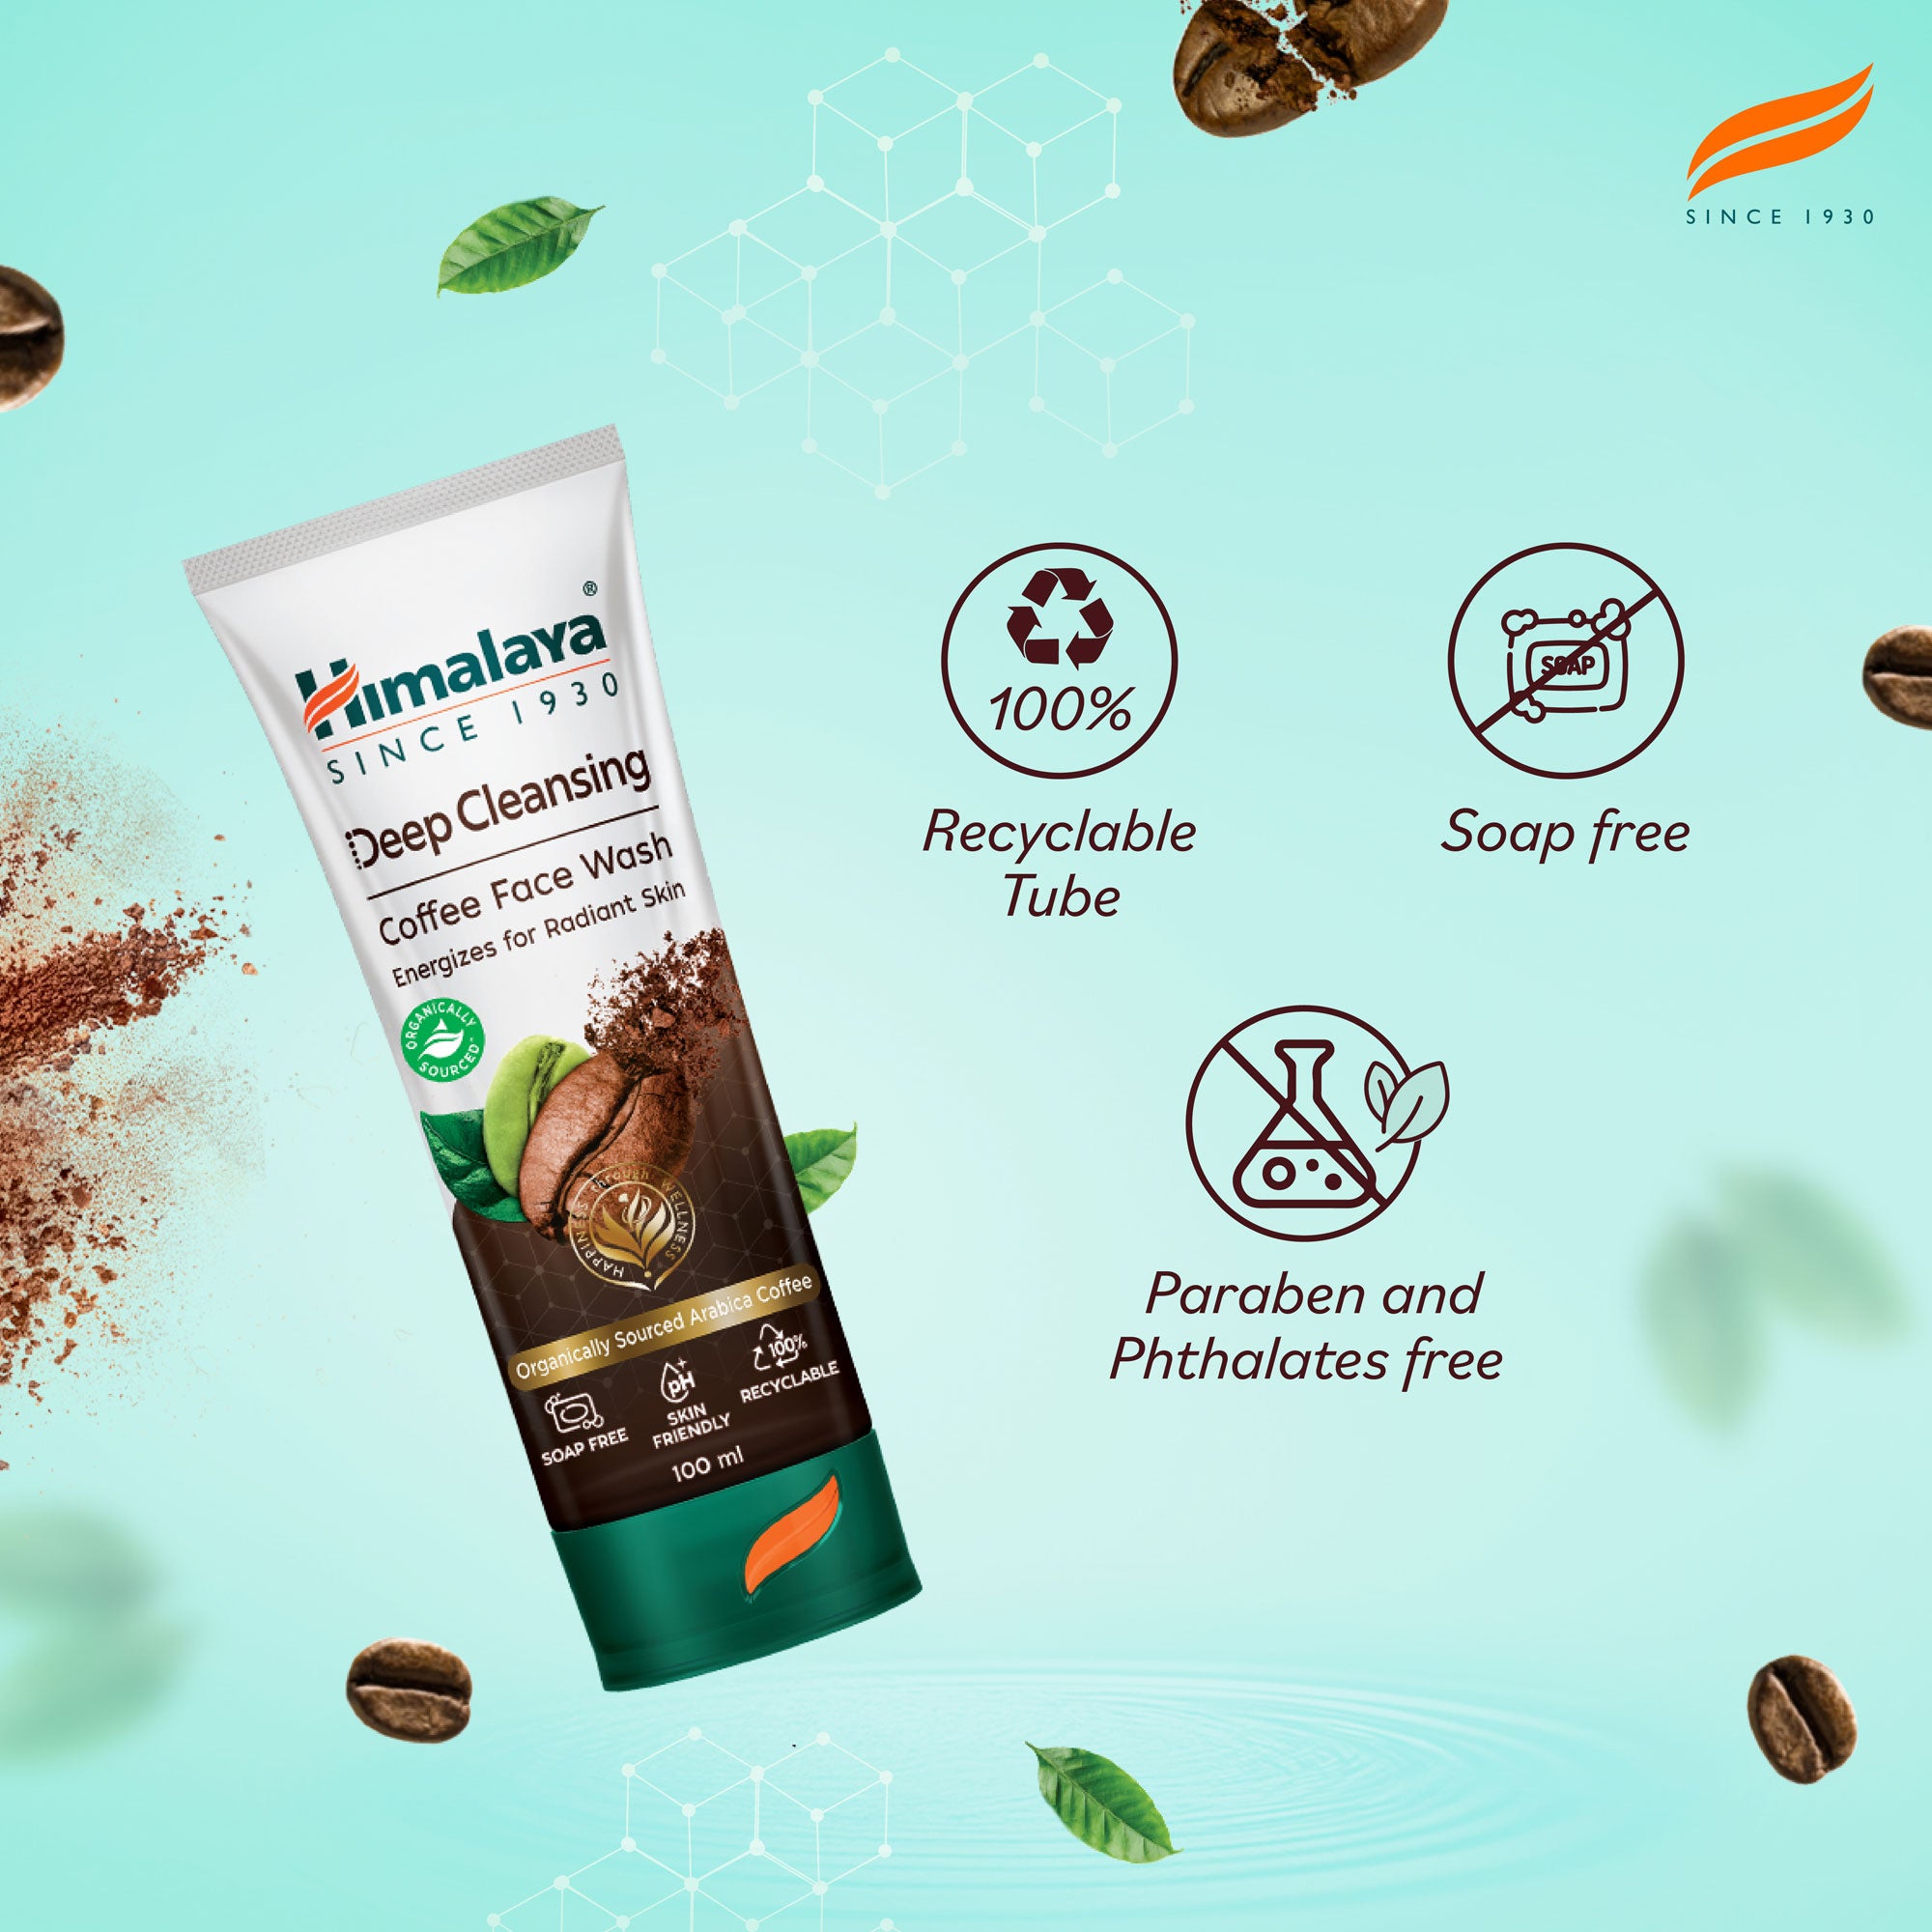 Himalaya Deep Cleansing Coffee Face Wash 100ml - 100% Recyclable Tube